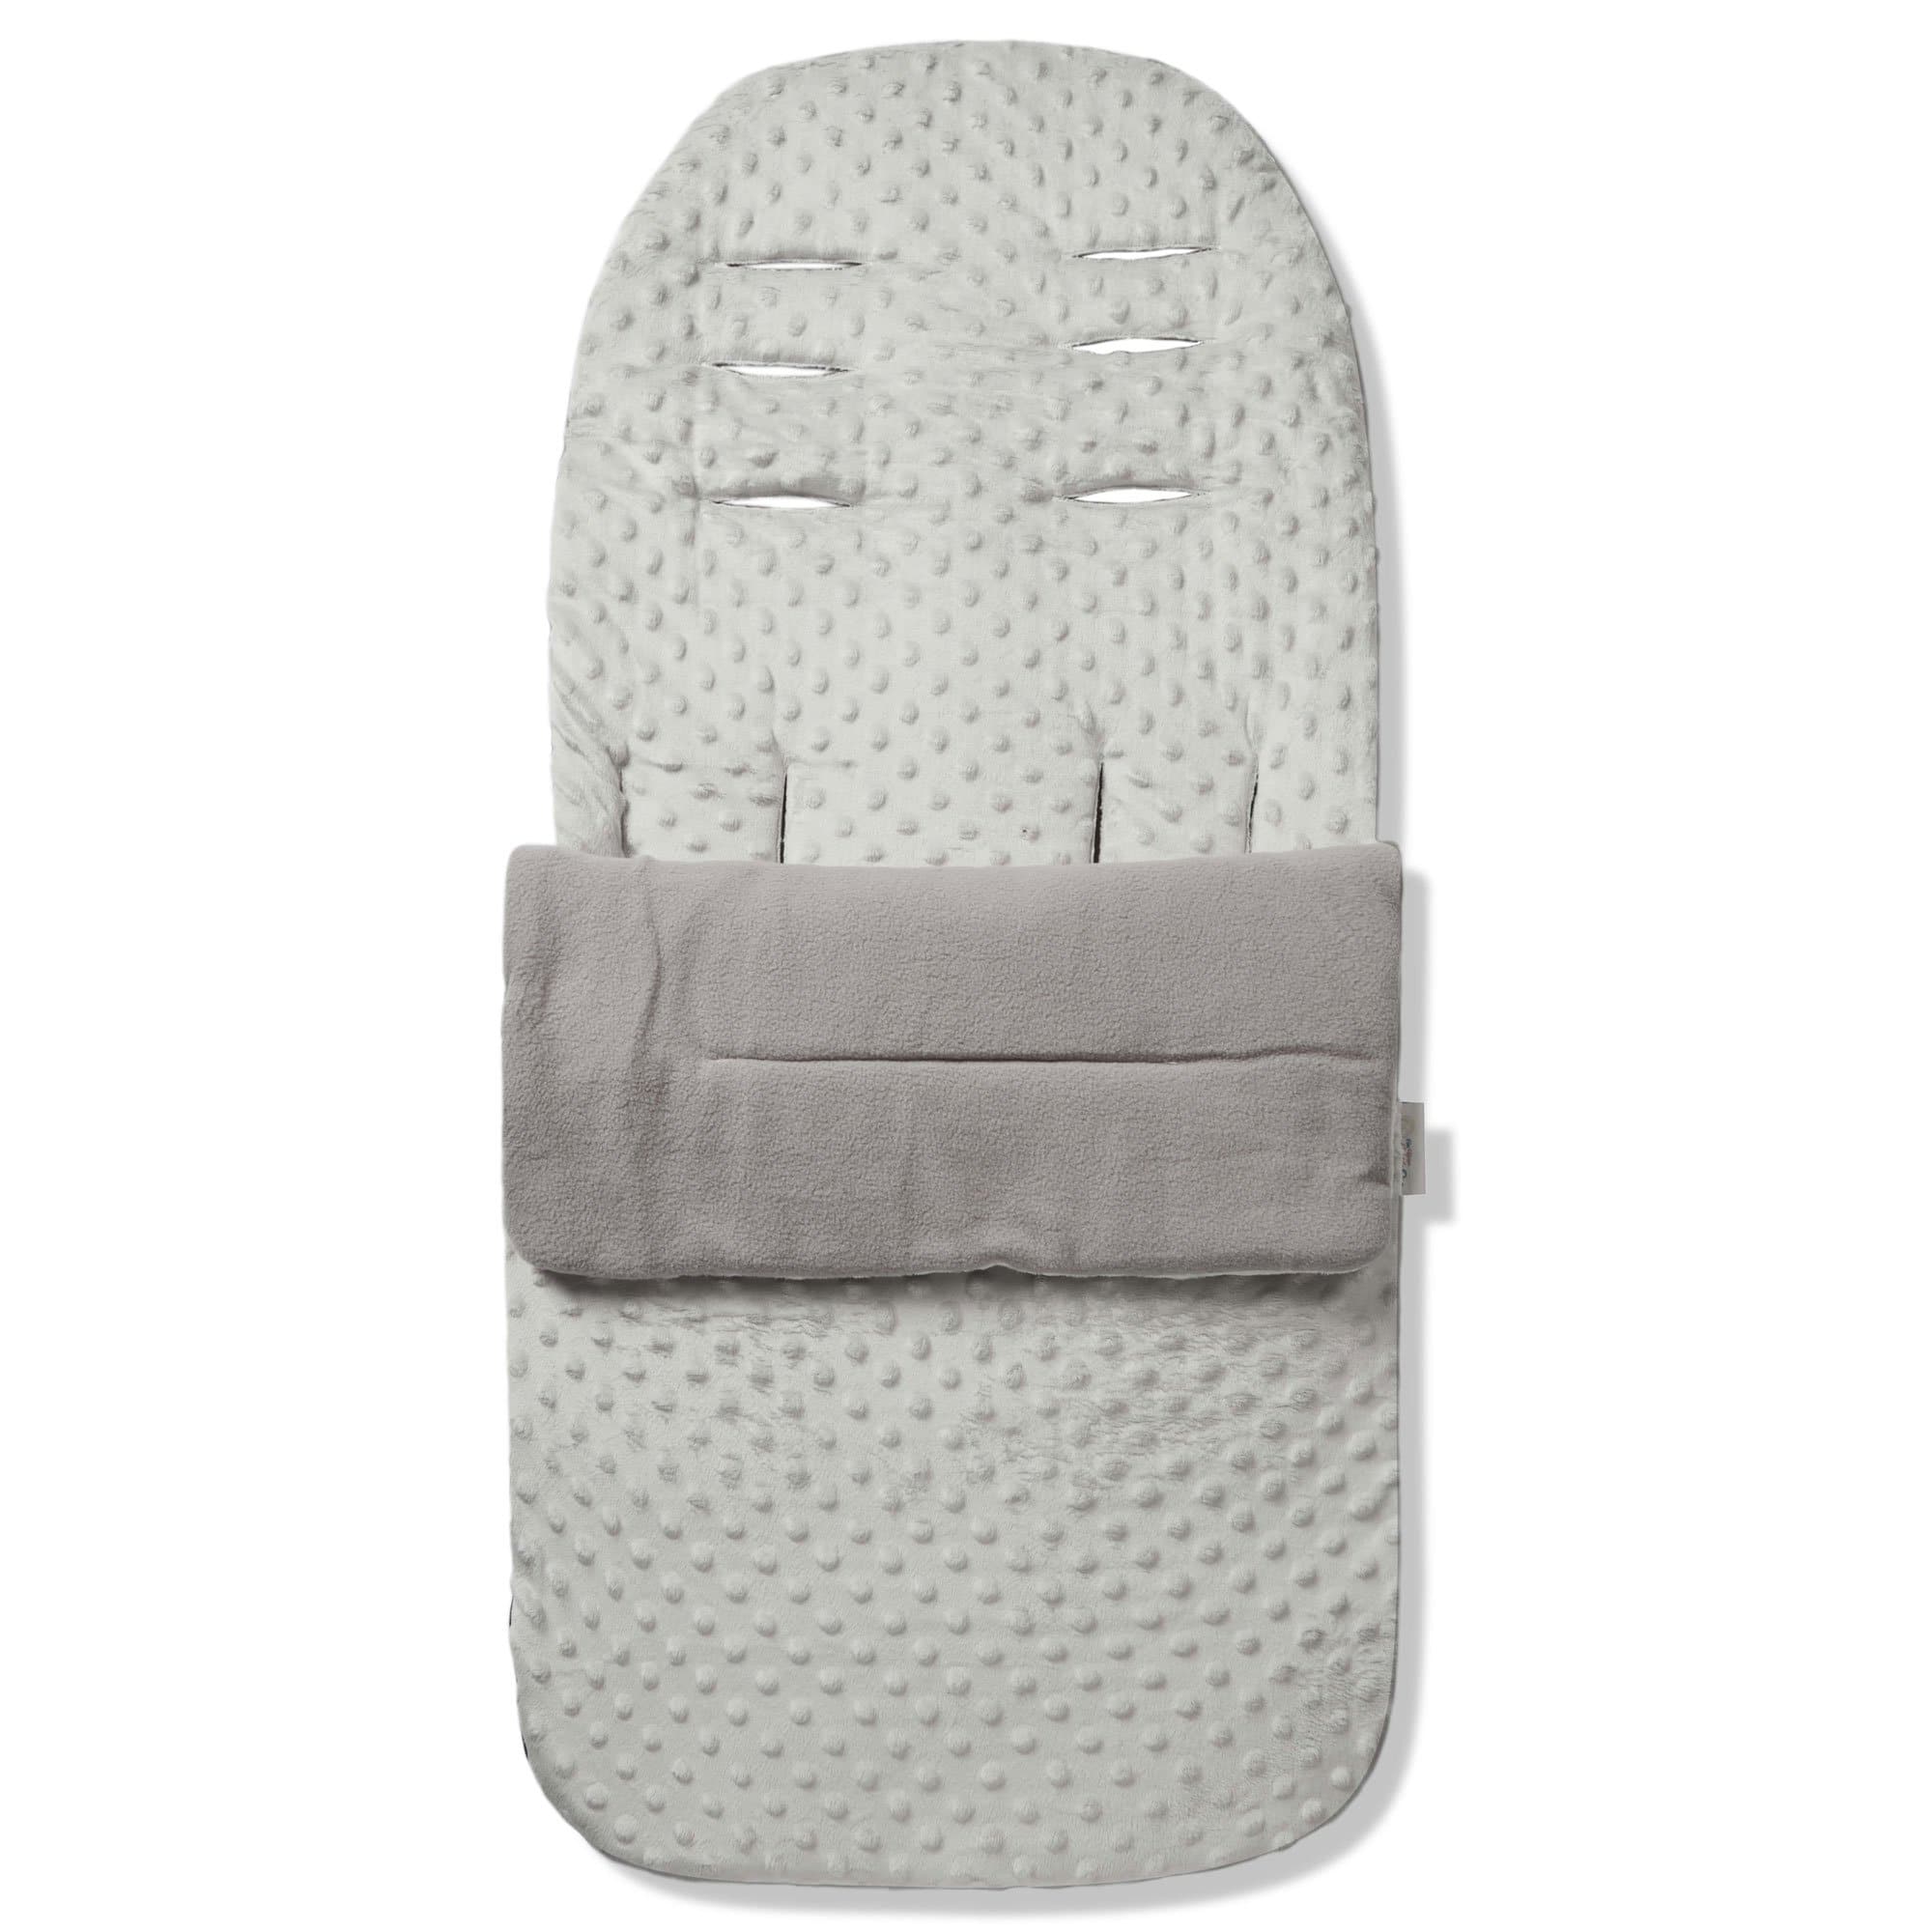 Dimple Footmuff / Cosy Toes Compatible with Norton - Grey / Fits All Models | For Your Little One